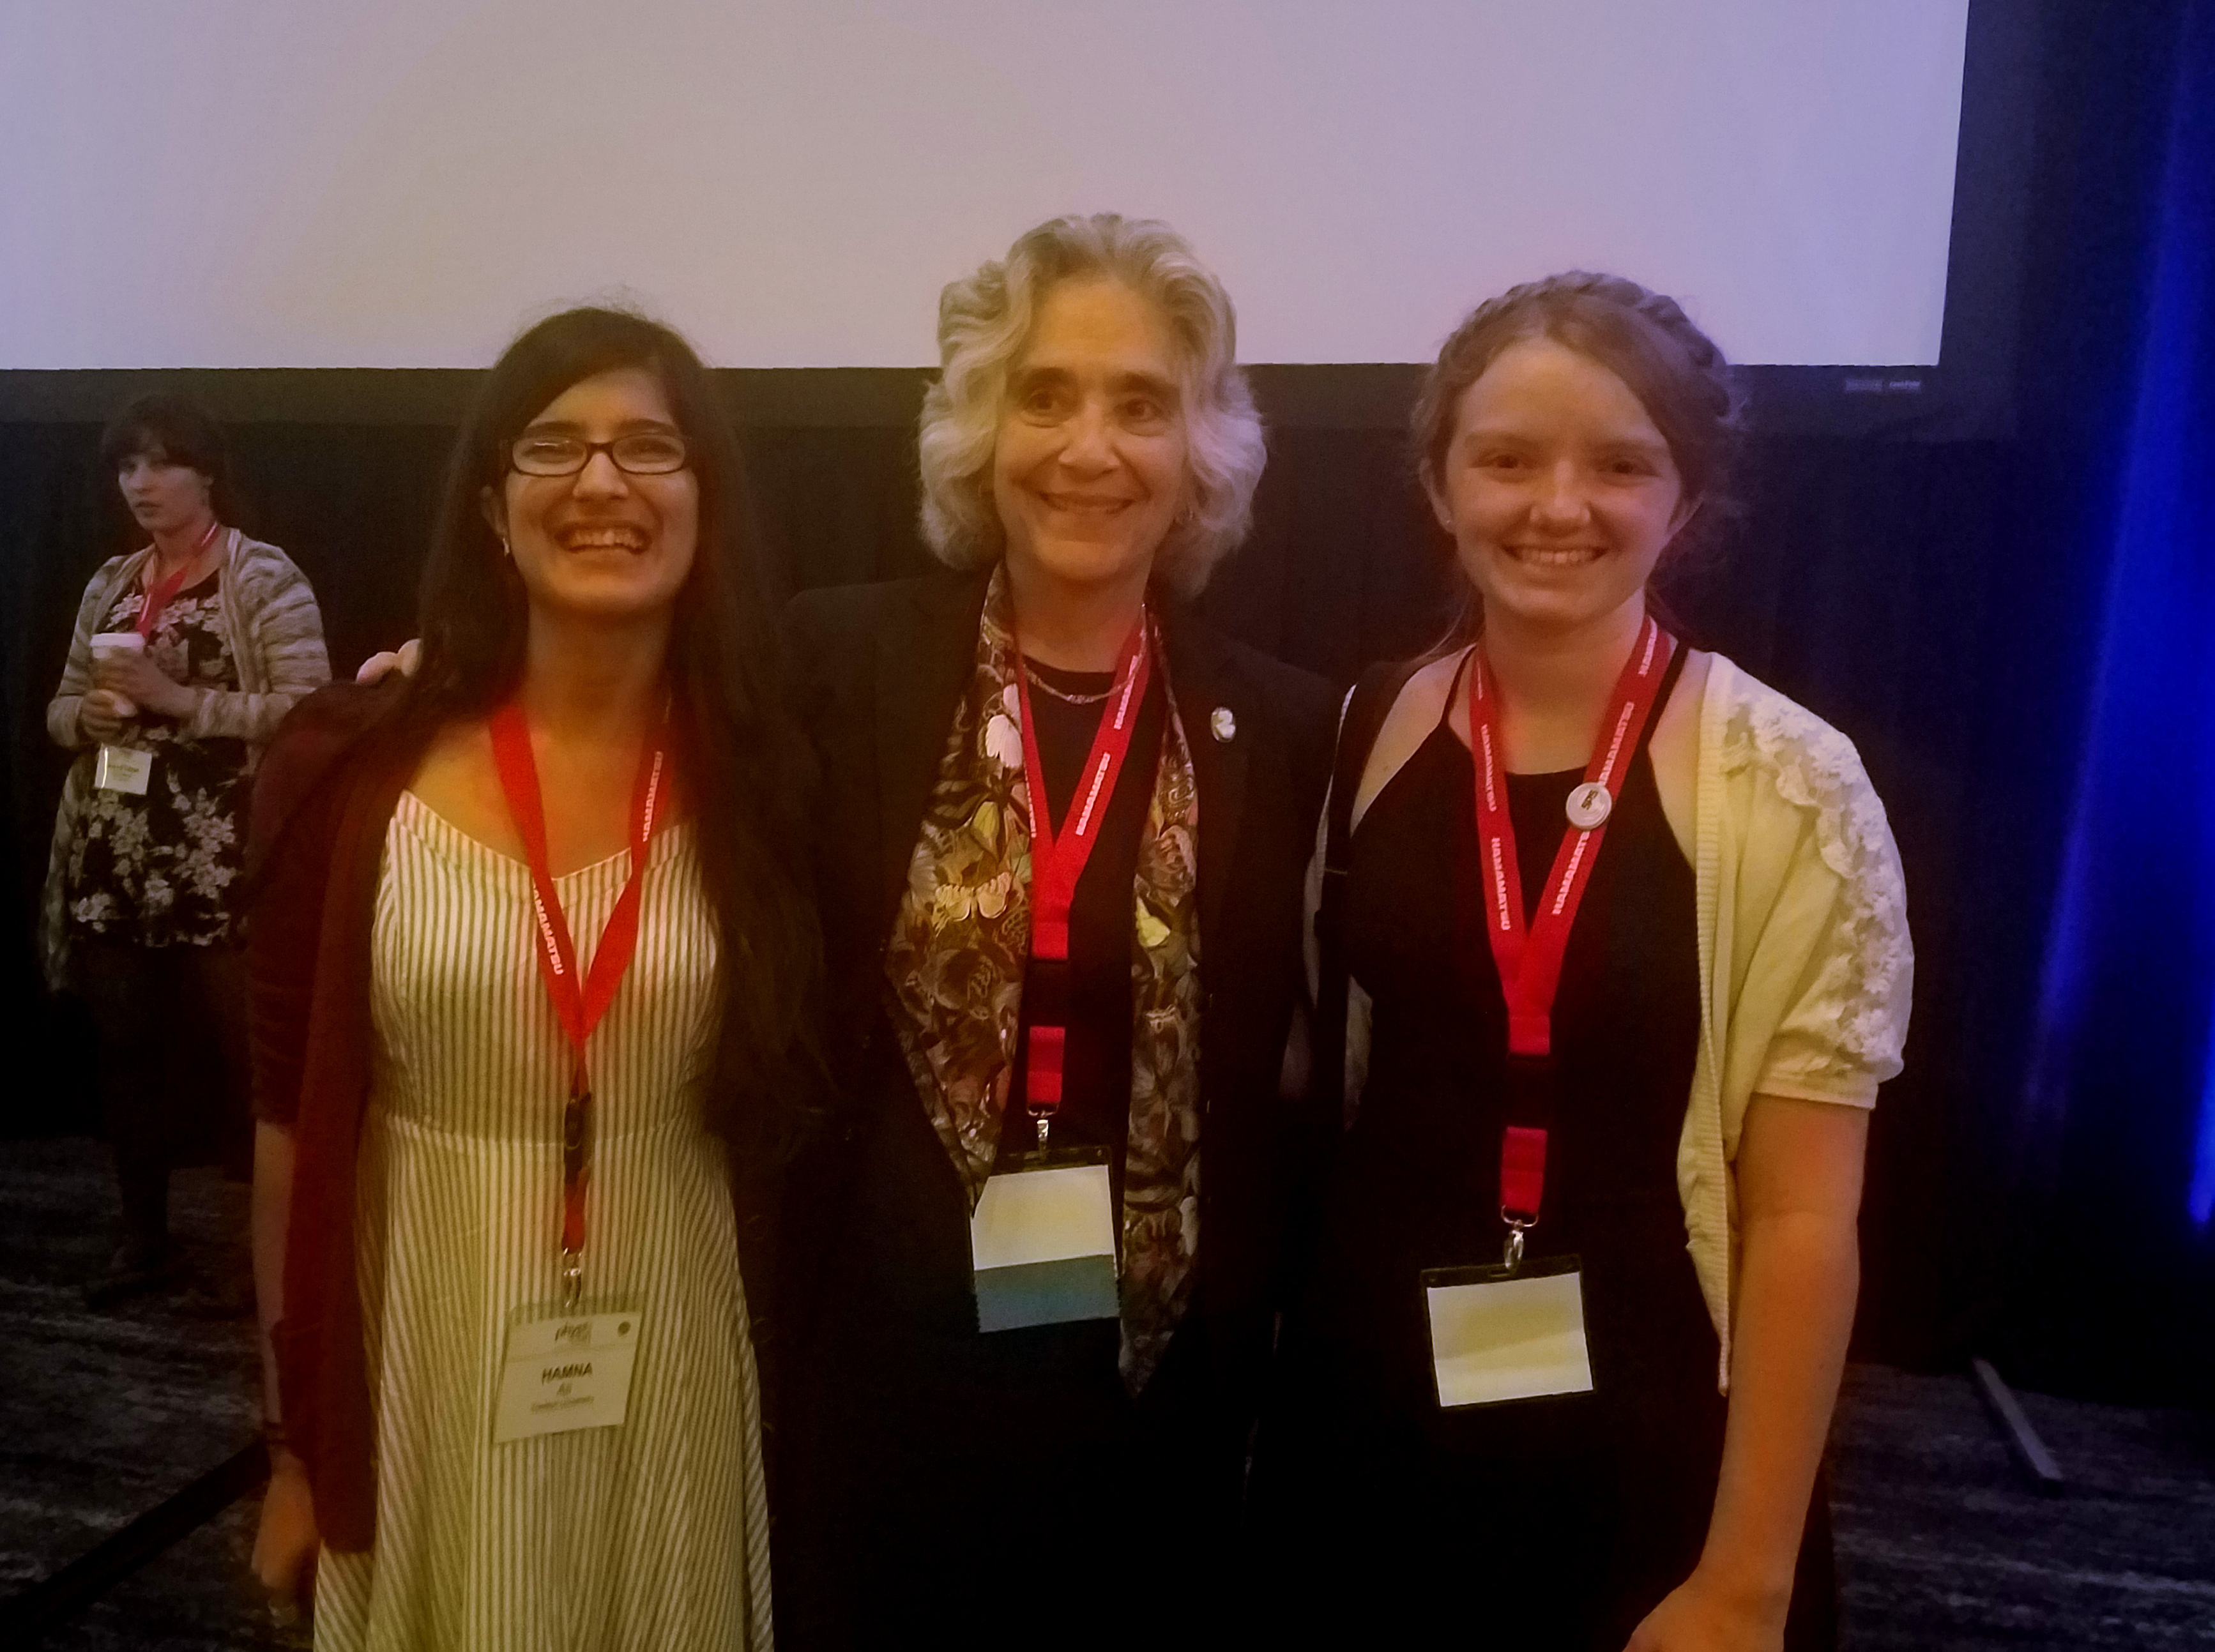 Hamna (left) and Rachael Huxford (right) with world-famous astronomer Jocelyn Bell Burnell at PhysCon 2016 in San Francisco